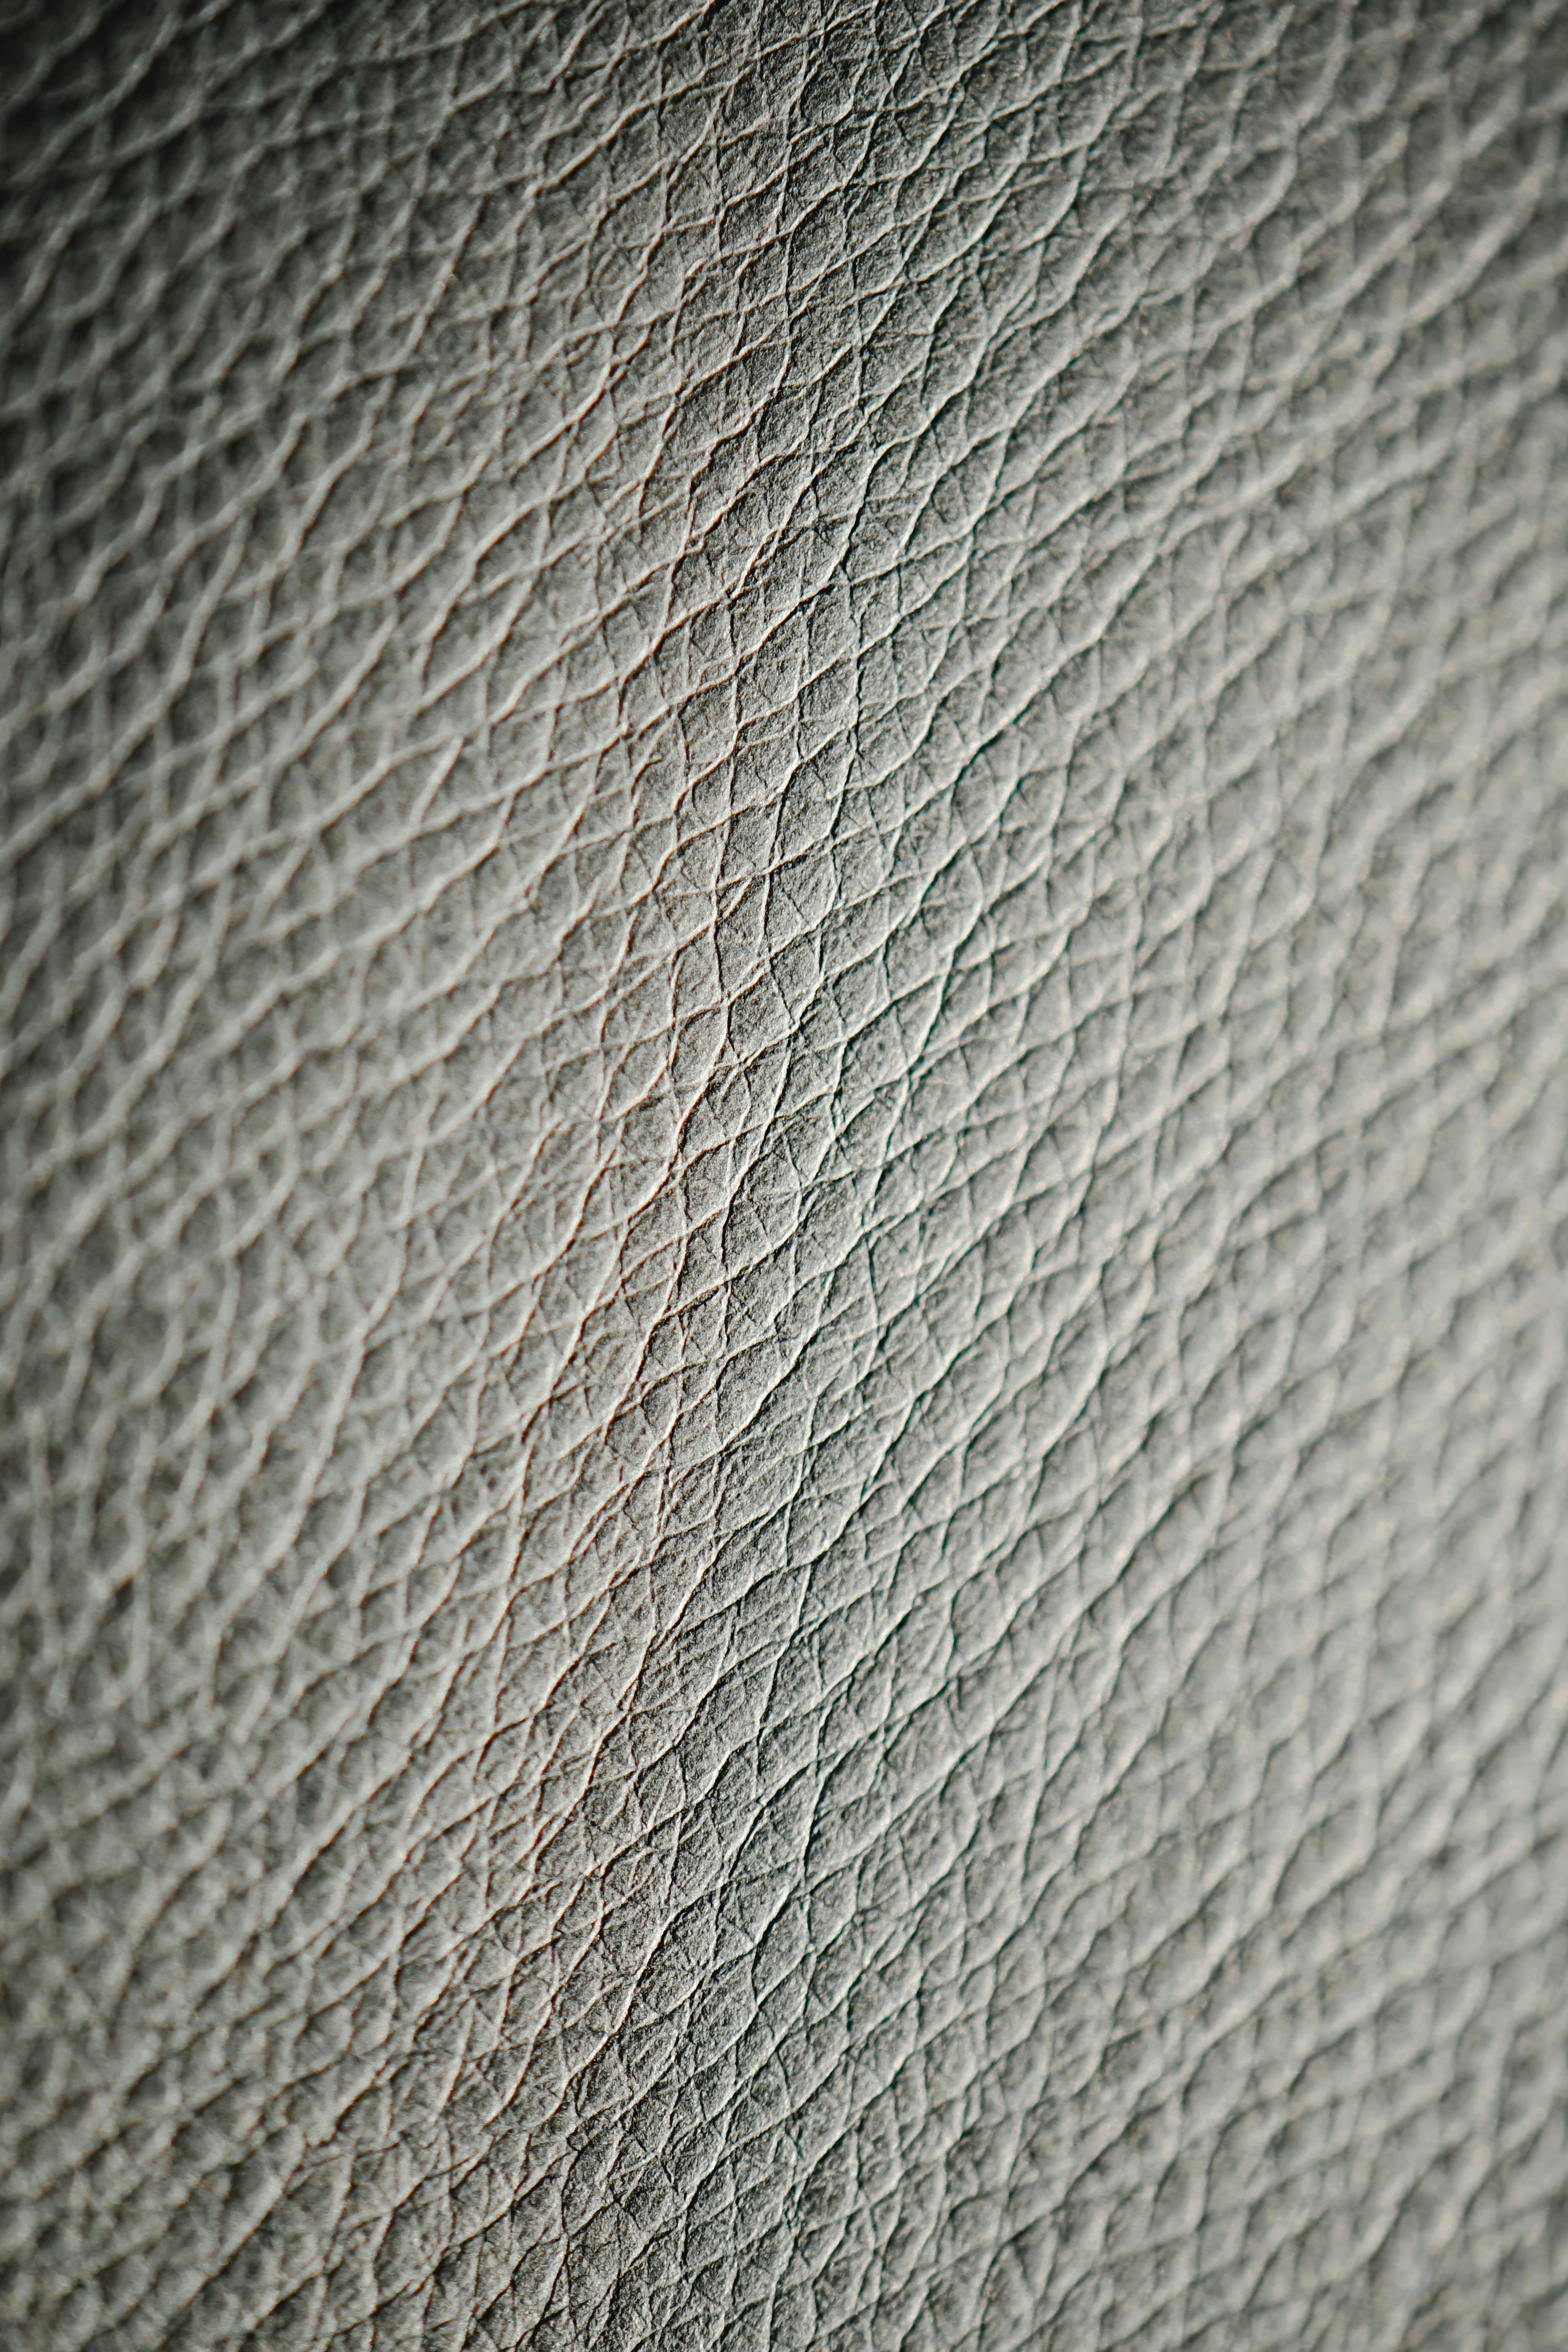 Leather Texture Photos, Download The BEST Free Leather Texture Stock Photos  & HD Images